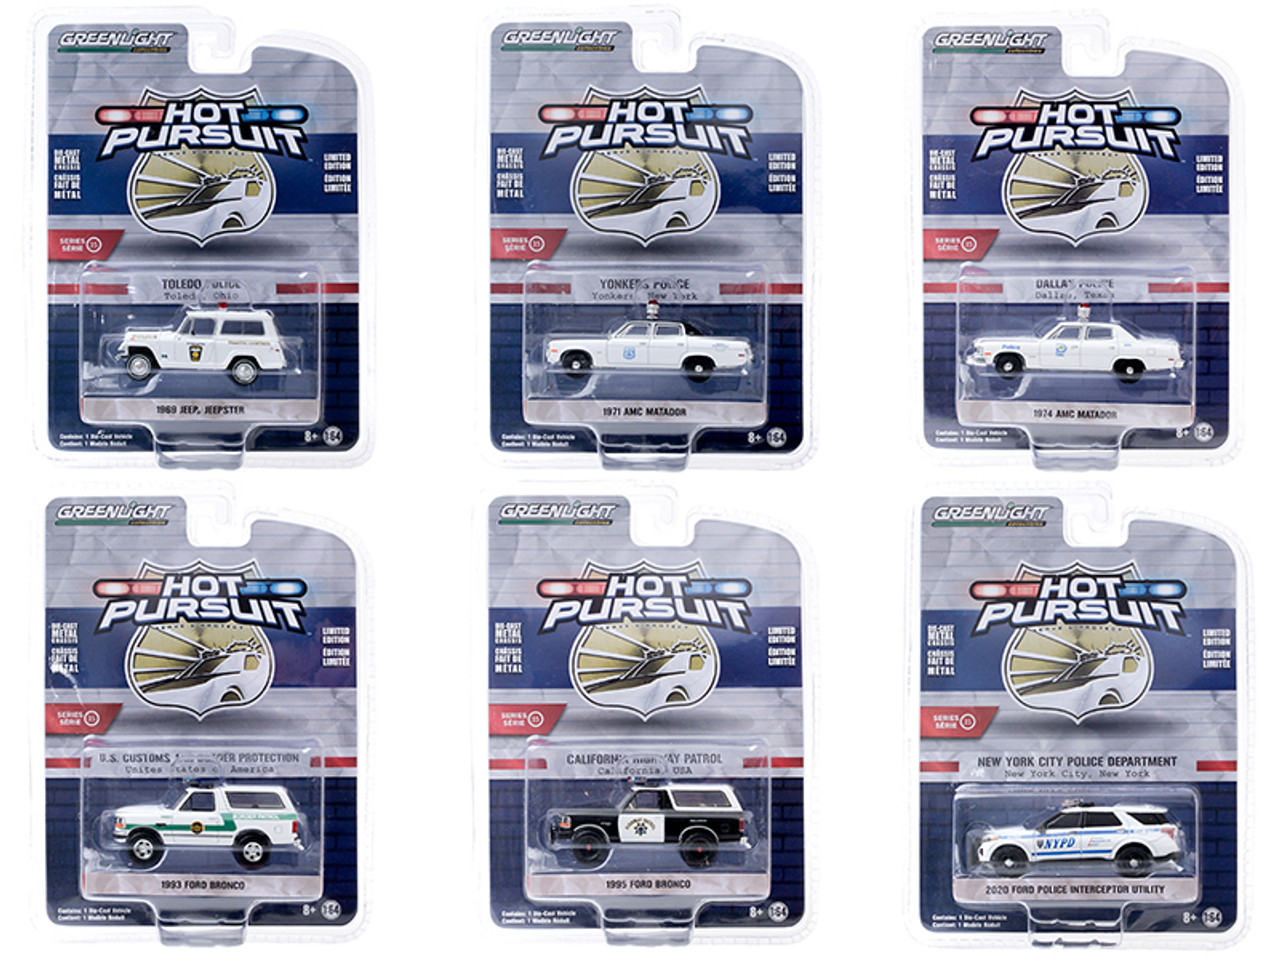 "Hot Pursuit" Set of 6 Police Cars Series 35 1/64 Diecast Model Cars by Greenlight